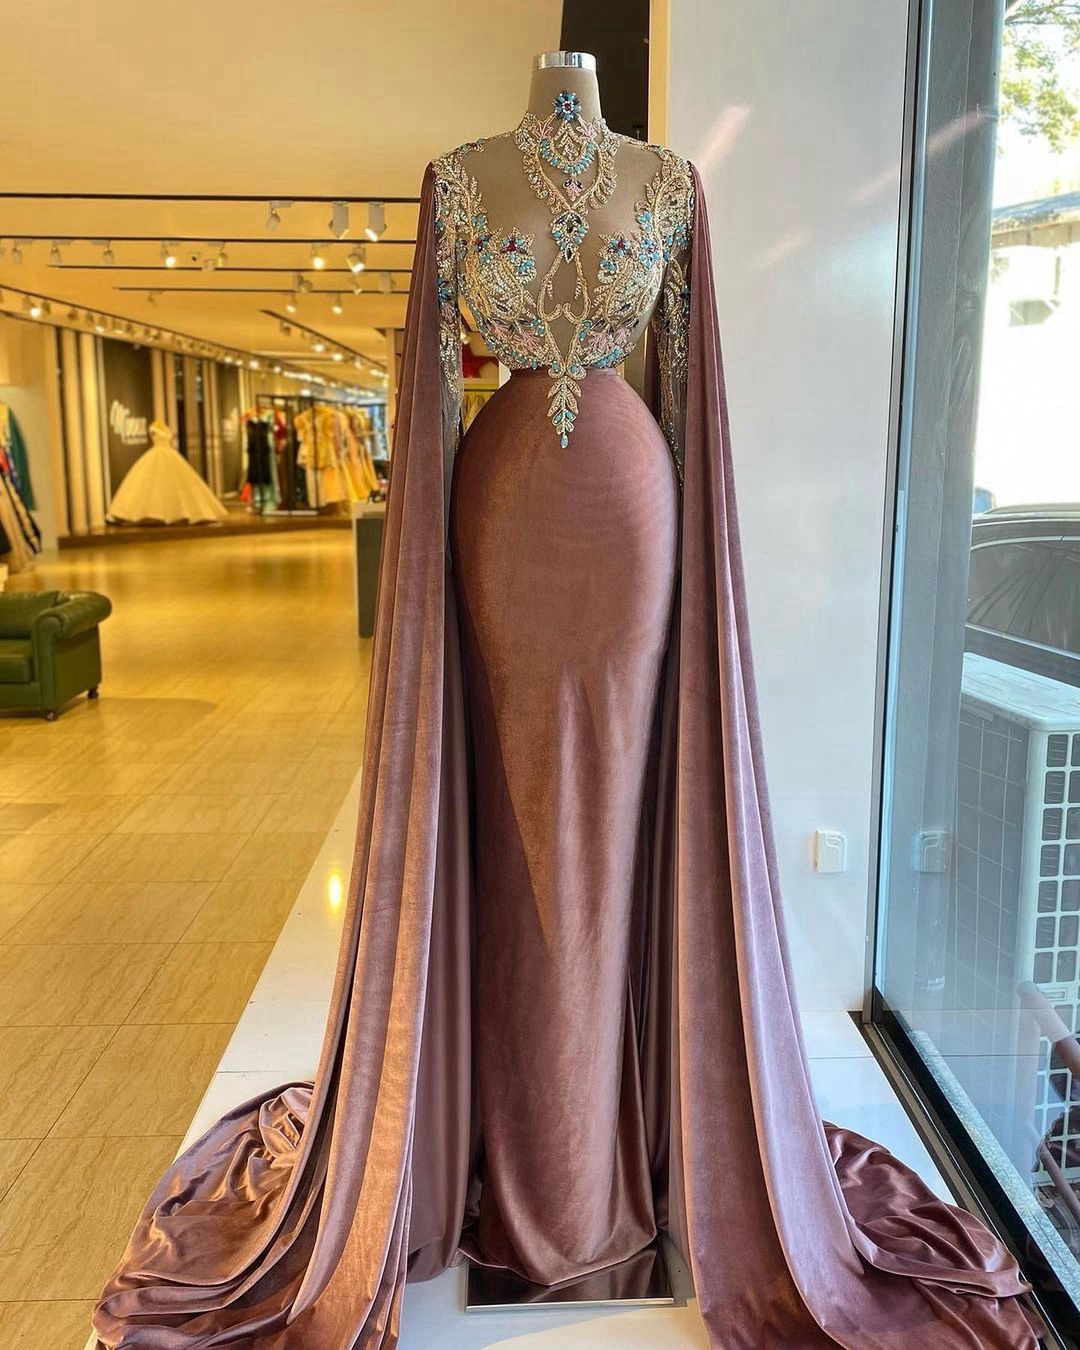 2022 Arabic High Neck Ankle Length Prom Dress With Crystal Beads, Front  Split, Zipper Back, And Tea Length Skirt Perfect For Formal Parties And  Evening Events From Haiyan4419, $90.63